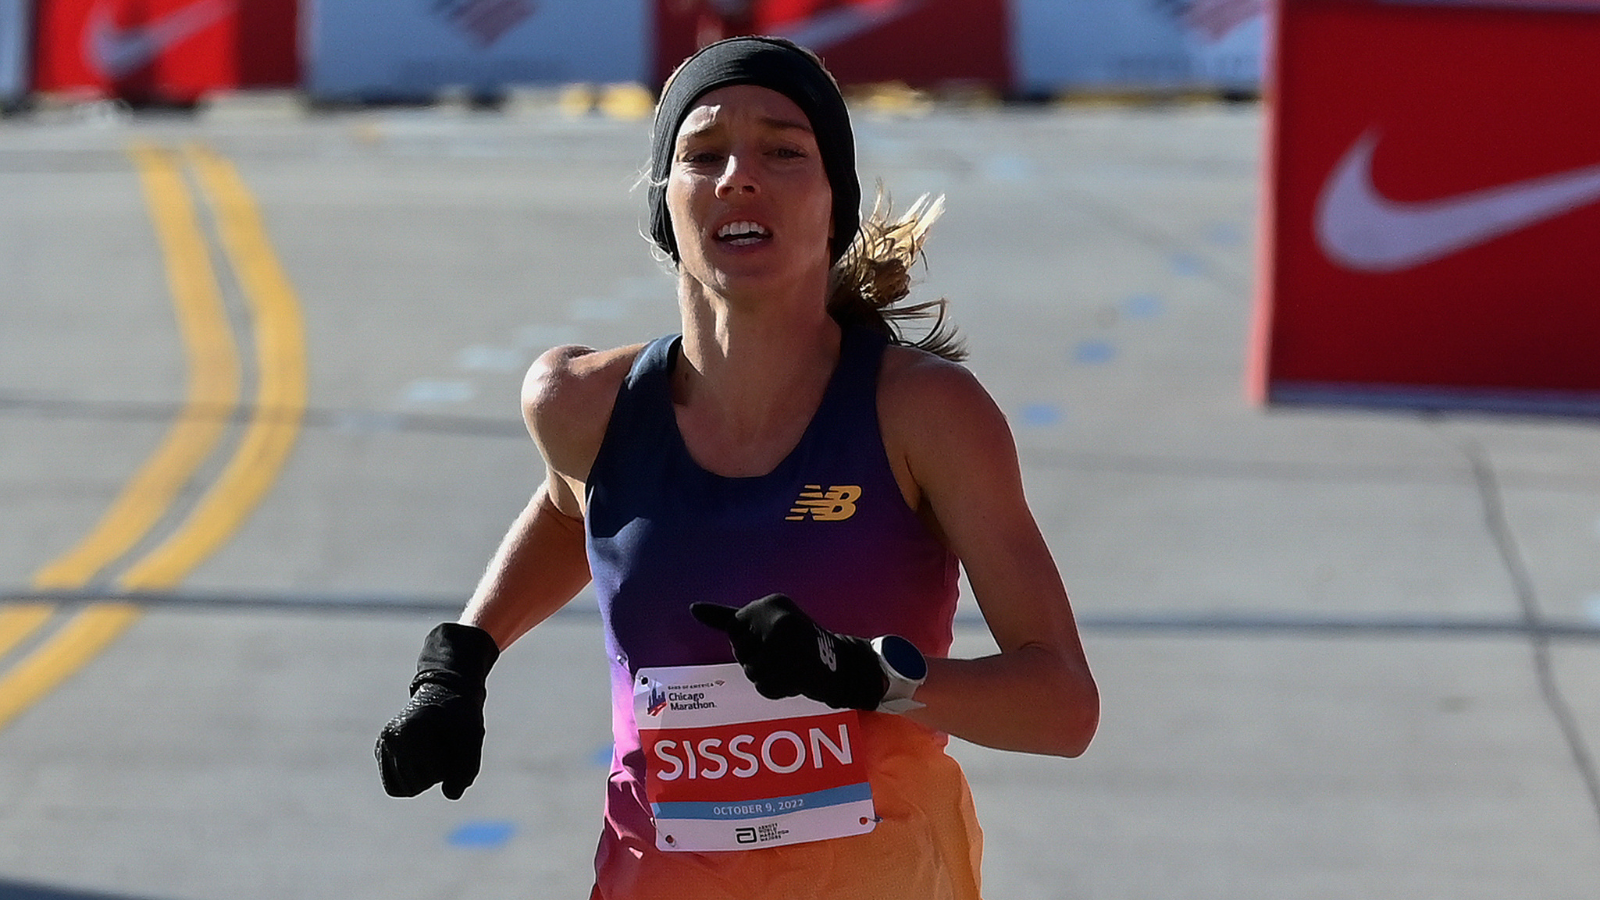 Emily Sisson Qualifies for Her Second Olympics with Impressive Marathon Performance